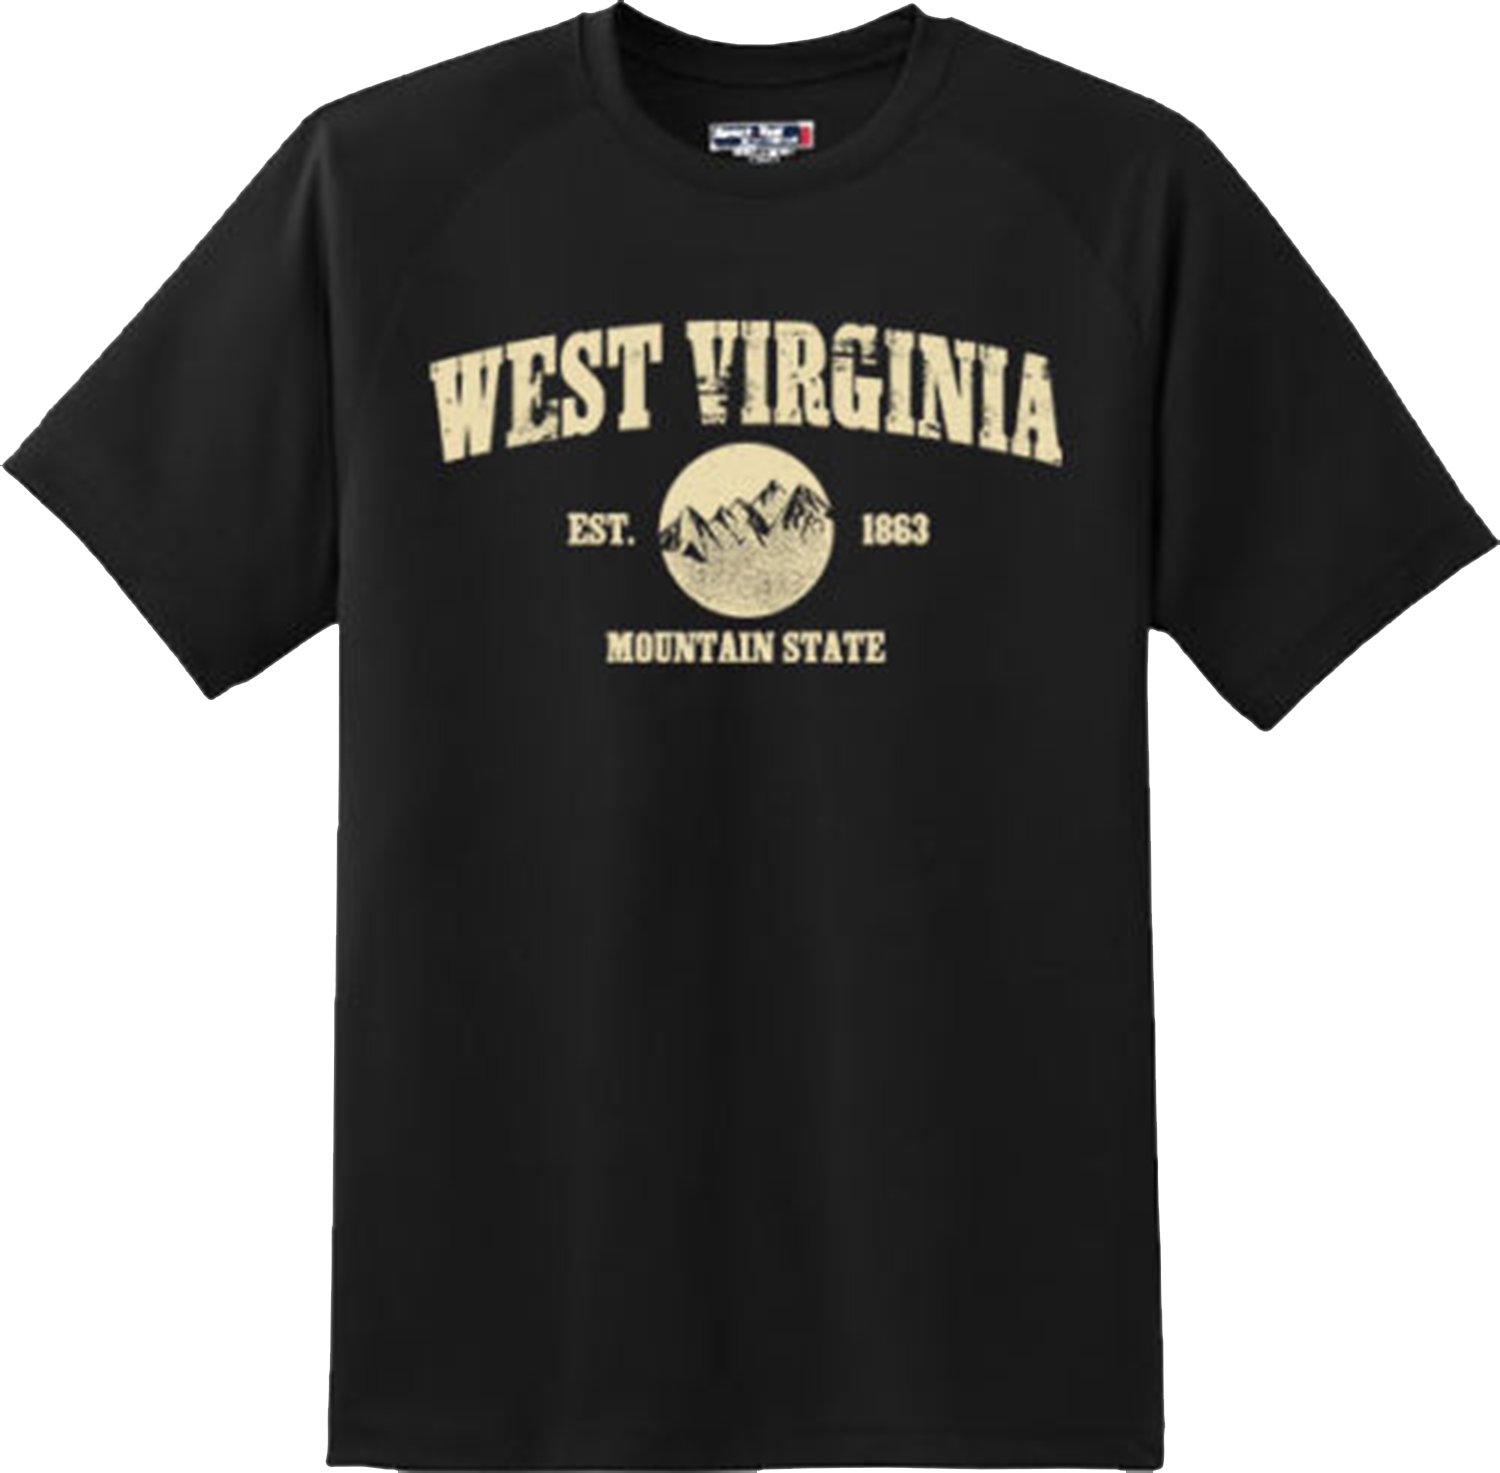 West Virginia State Vintage Retro Hometown America Gift T Shirt New Graphic Tee